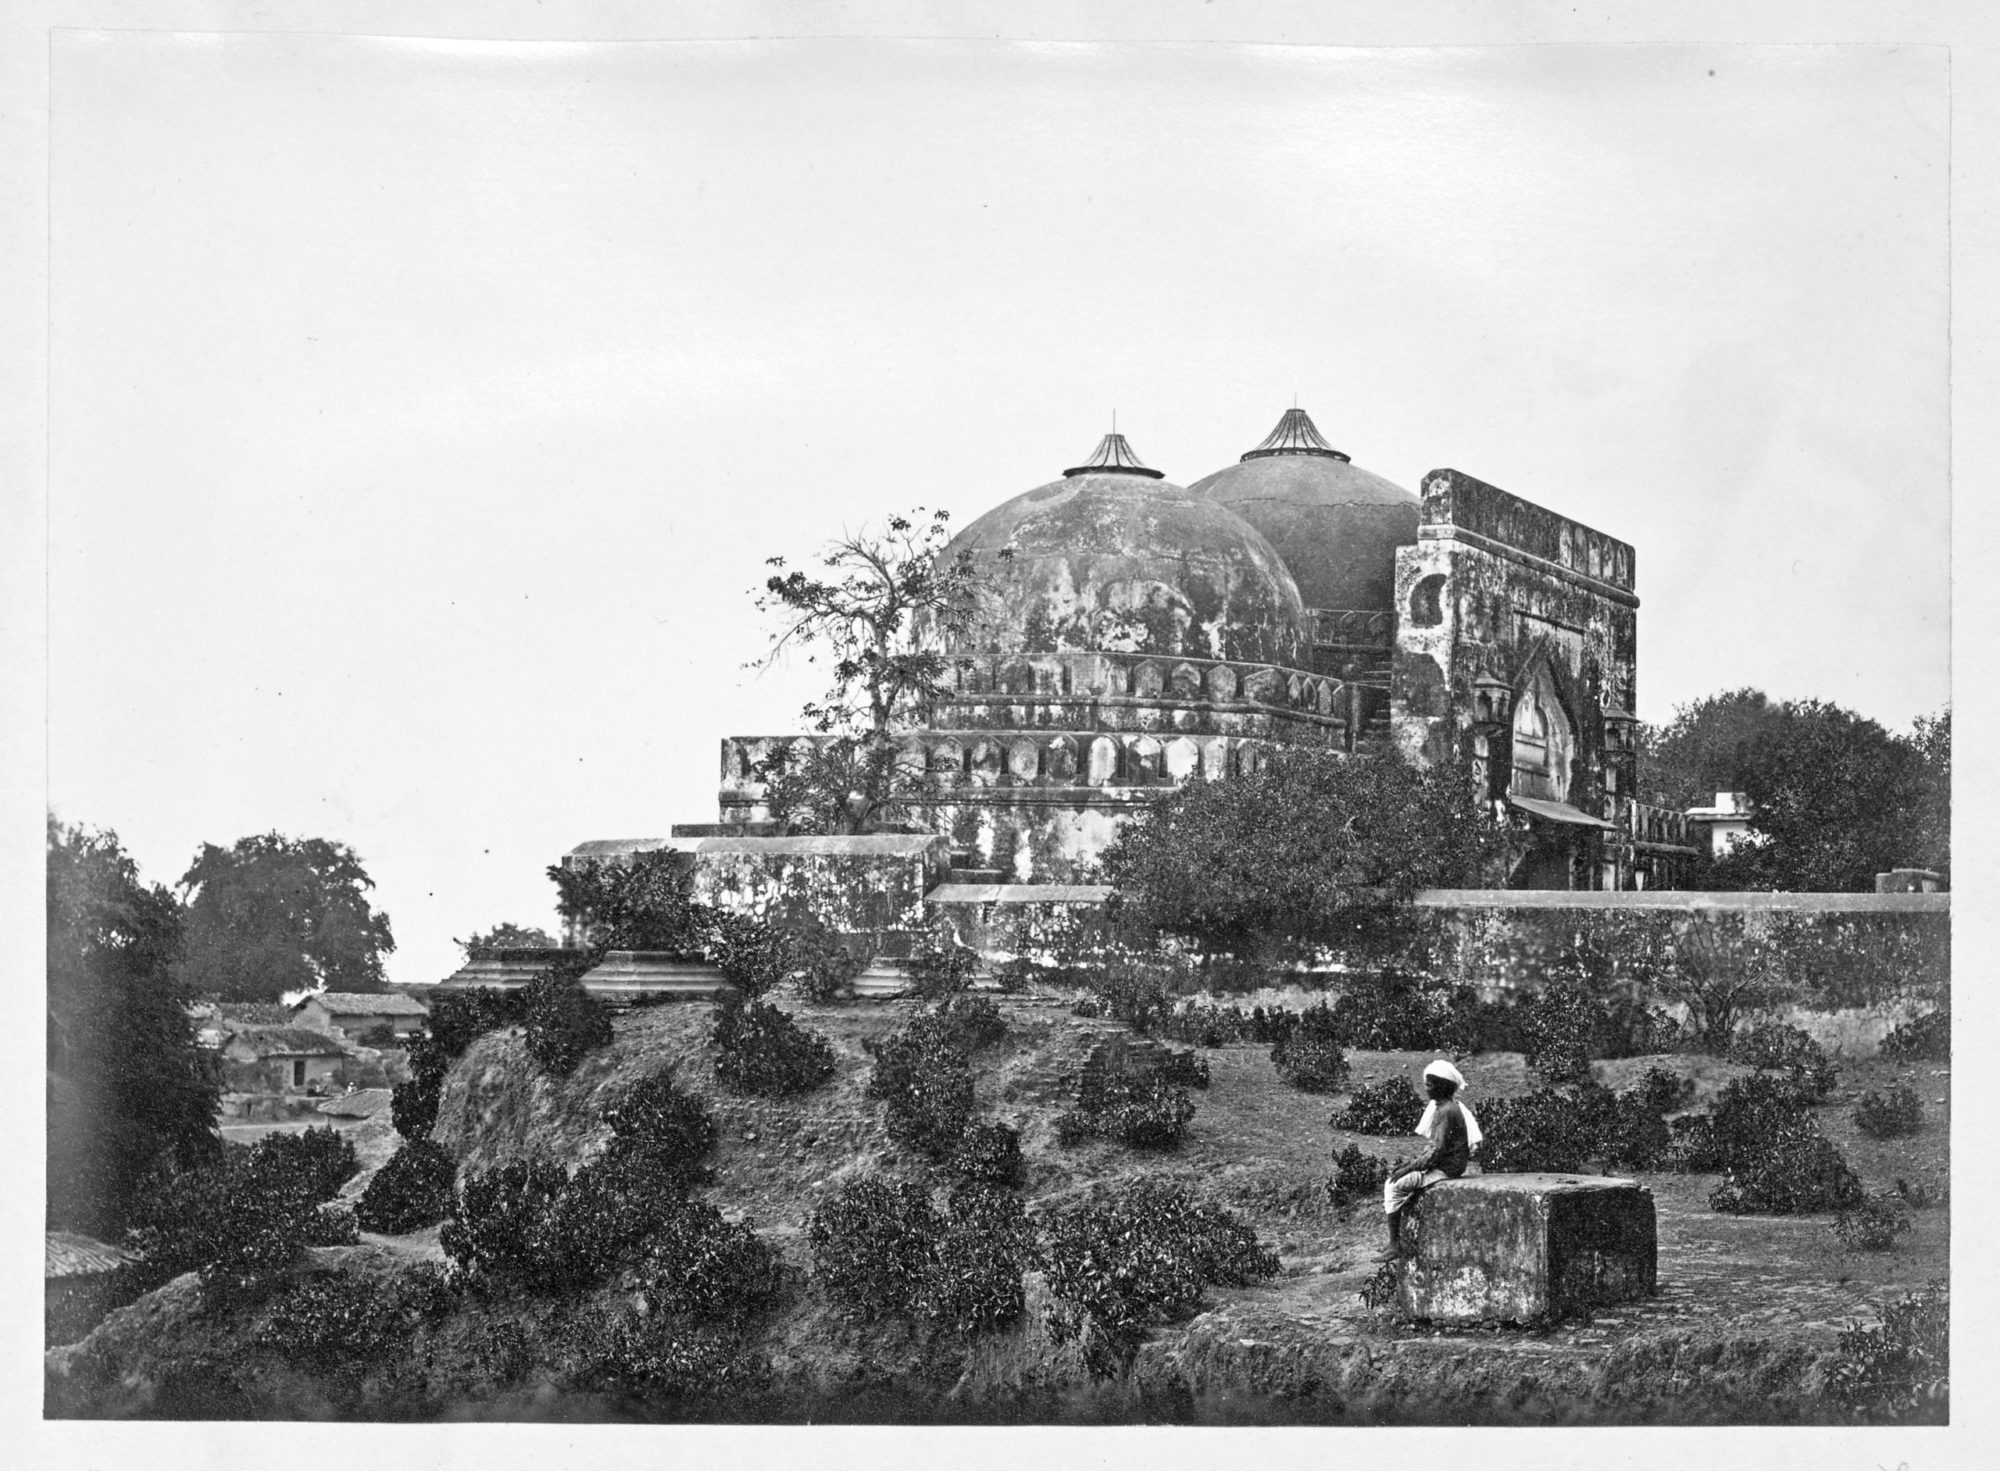 A black and white image of a large worn down building with two domes over the top. In front of the building there is sparse greenery, such as trees and bushes. Near the forefront sits a man with a white headscarf atop a stone.